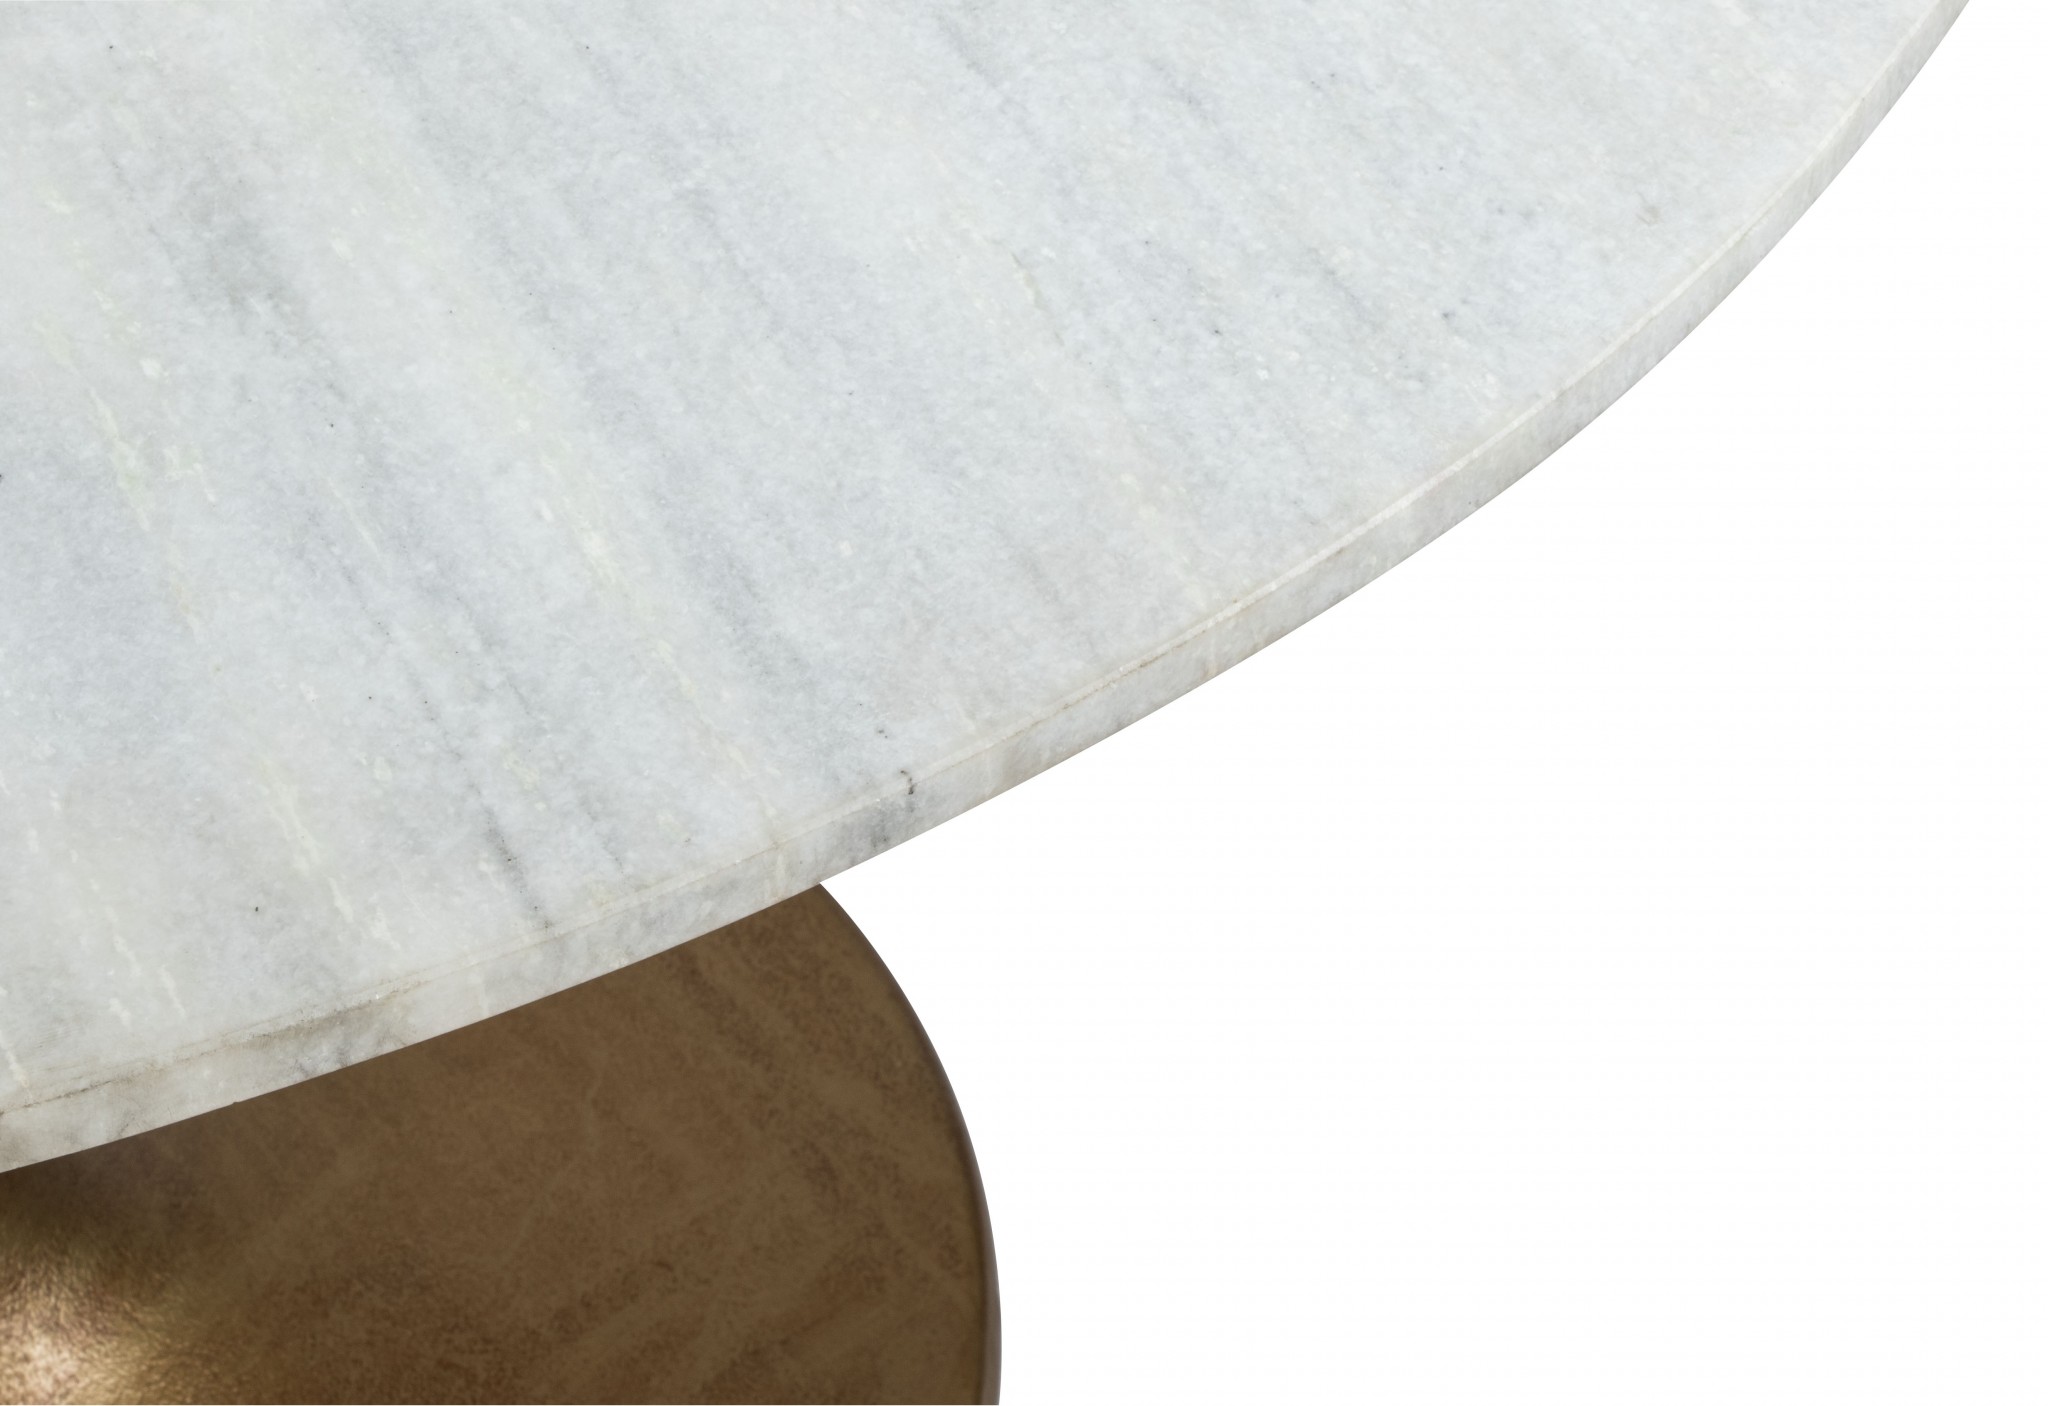 White Marble and Gold Round Pedestal Dining Table